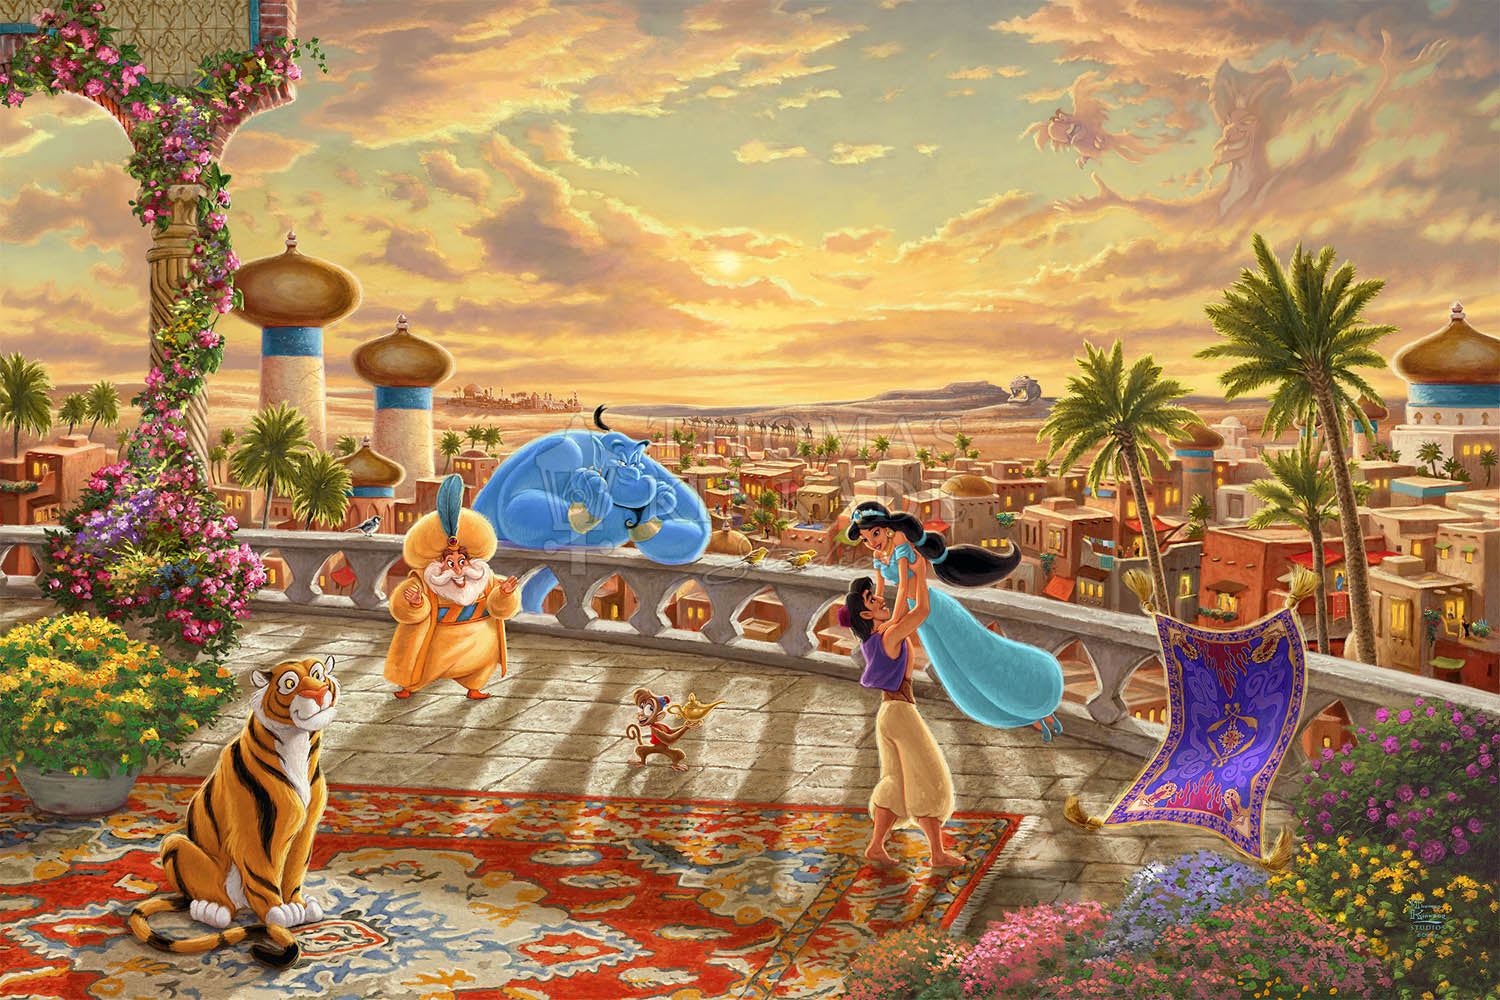 A romantic setting glow over the kingdom of Agrabah. Aladdin twirls Jasmine around the palace balcony, as they celebrate with all their friends. ver the kingdom of Agrabah as Aladdin twirls Jasmine around the palace balcony  -Unframed.